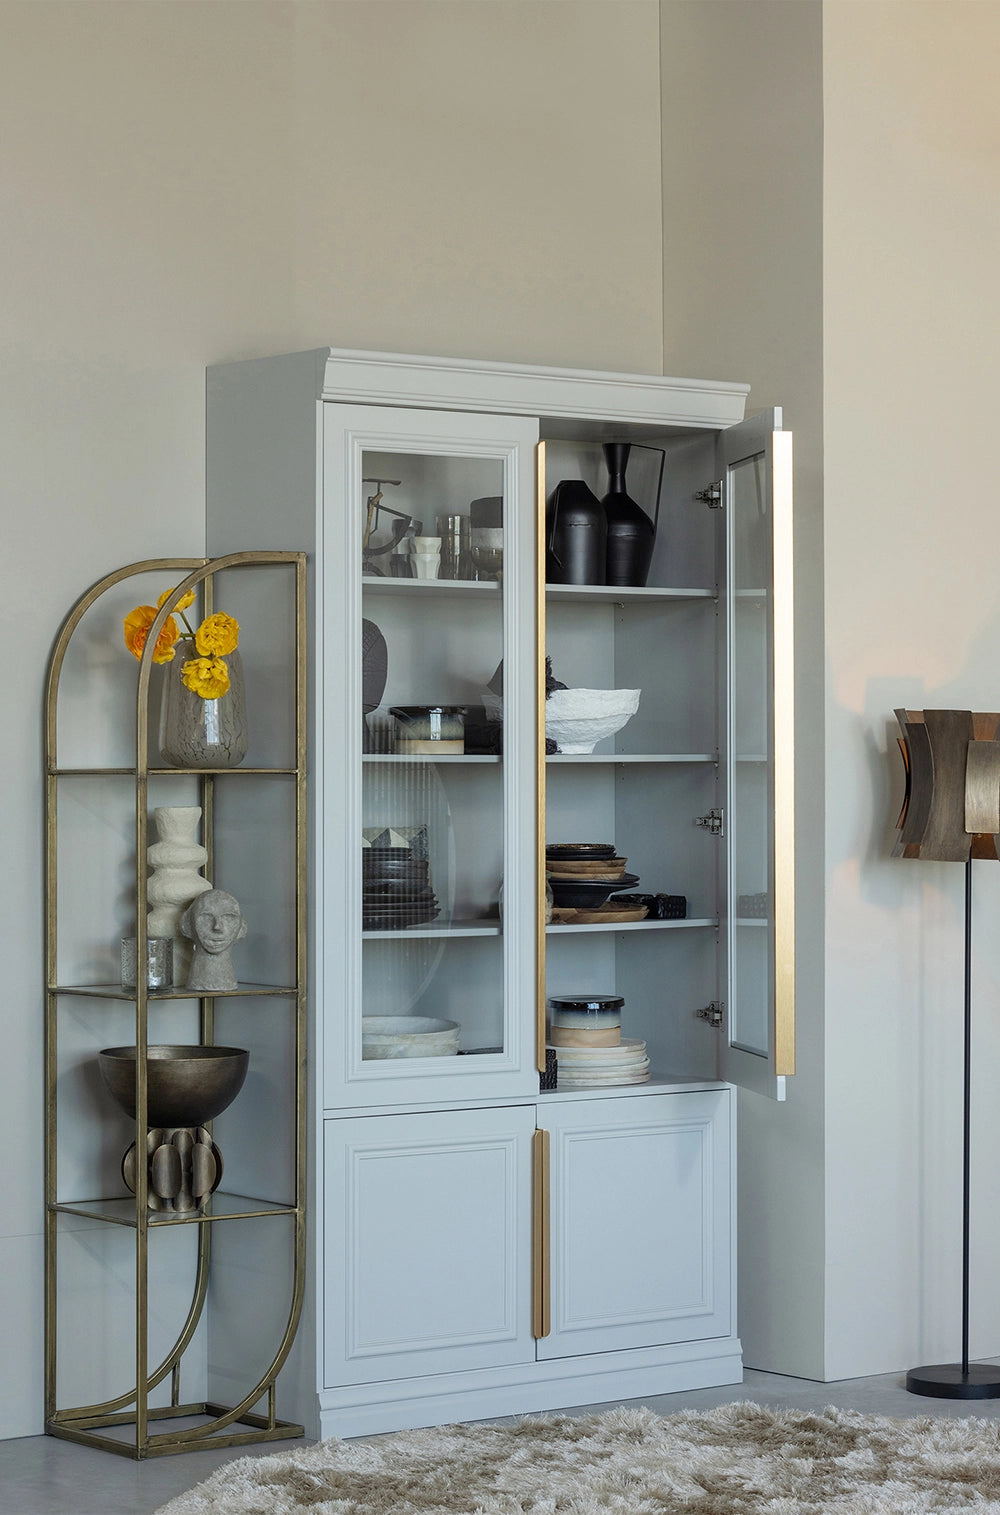 Maca Display Cabinet in Mist Finish with Utensils and Shelves in Living Room Setting